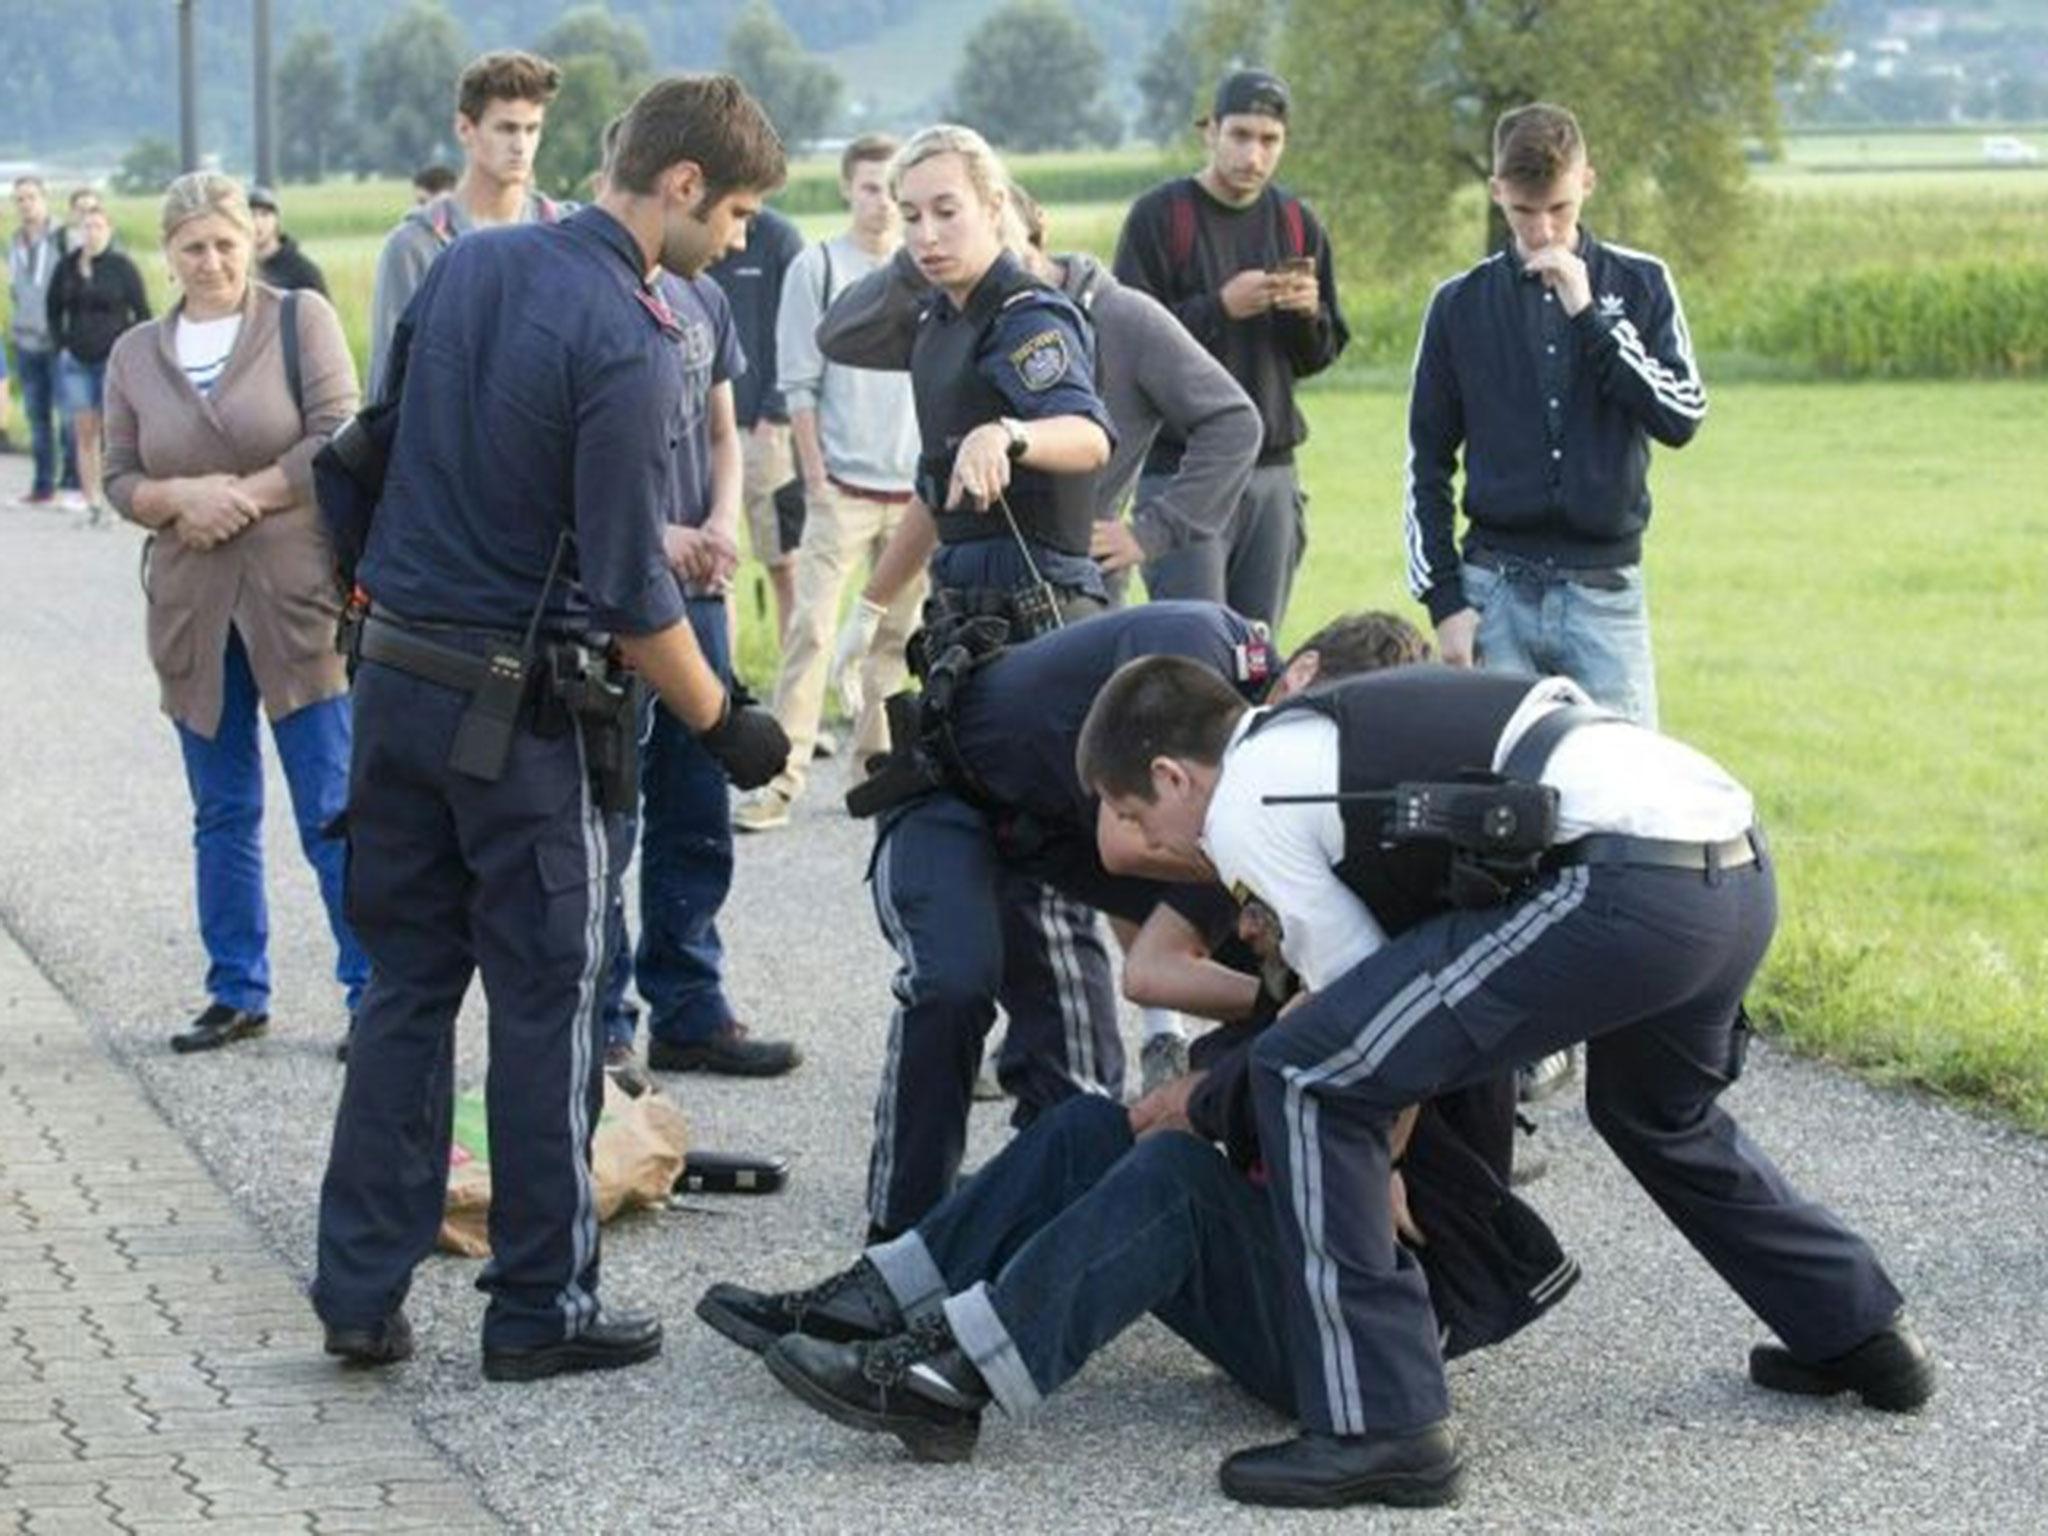 Austrian policemen arrest a suspect on 16 August, 2016 at the train station near the village of Sulz, in Vorarlberg, Austria, after he had attacked two train passengers with a knife